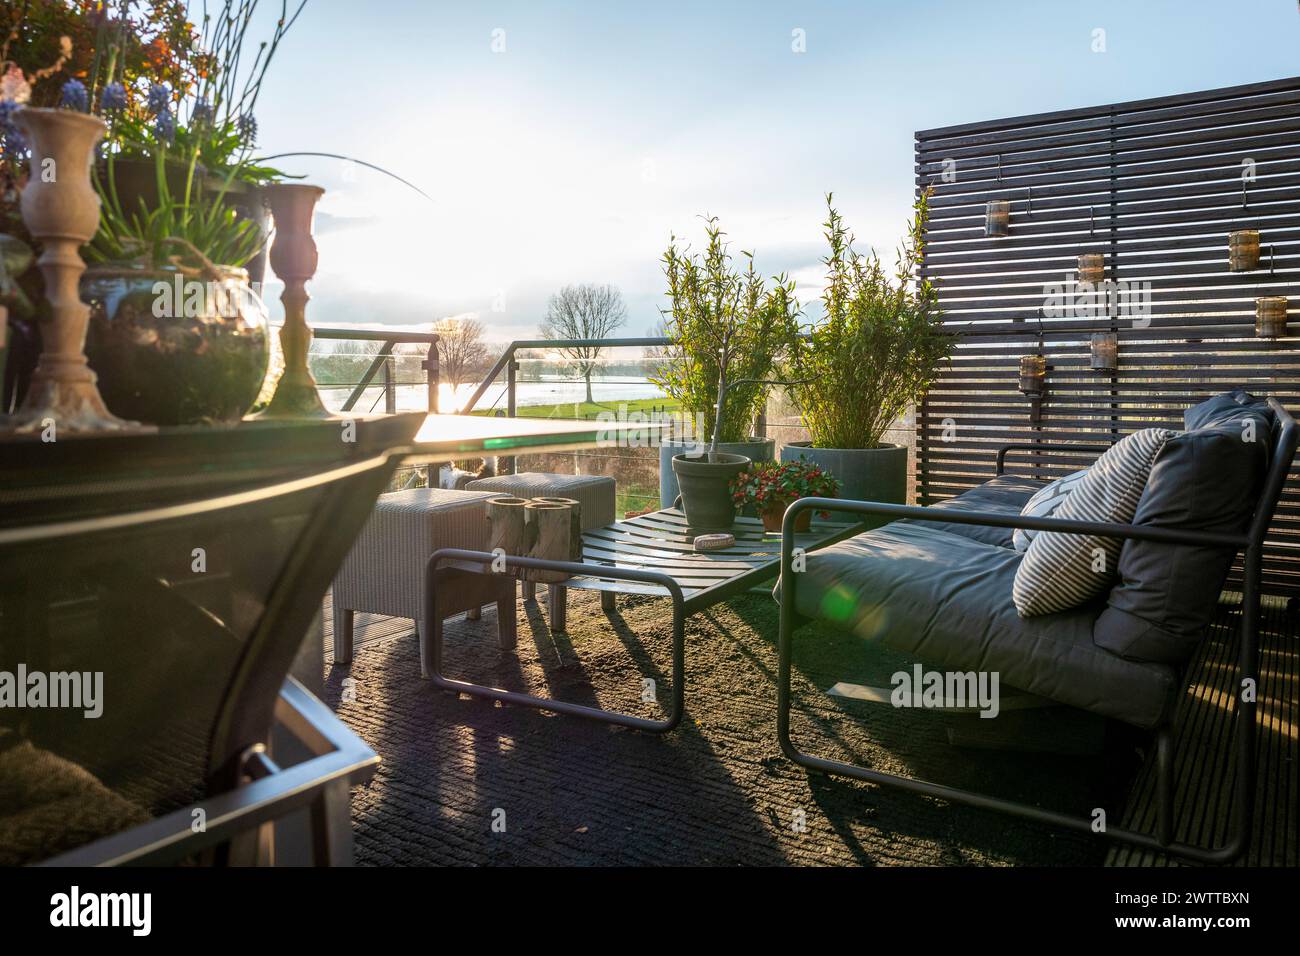 A cozy outdoor patio bathed in warm sunlight. Stock Photo